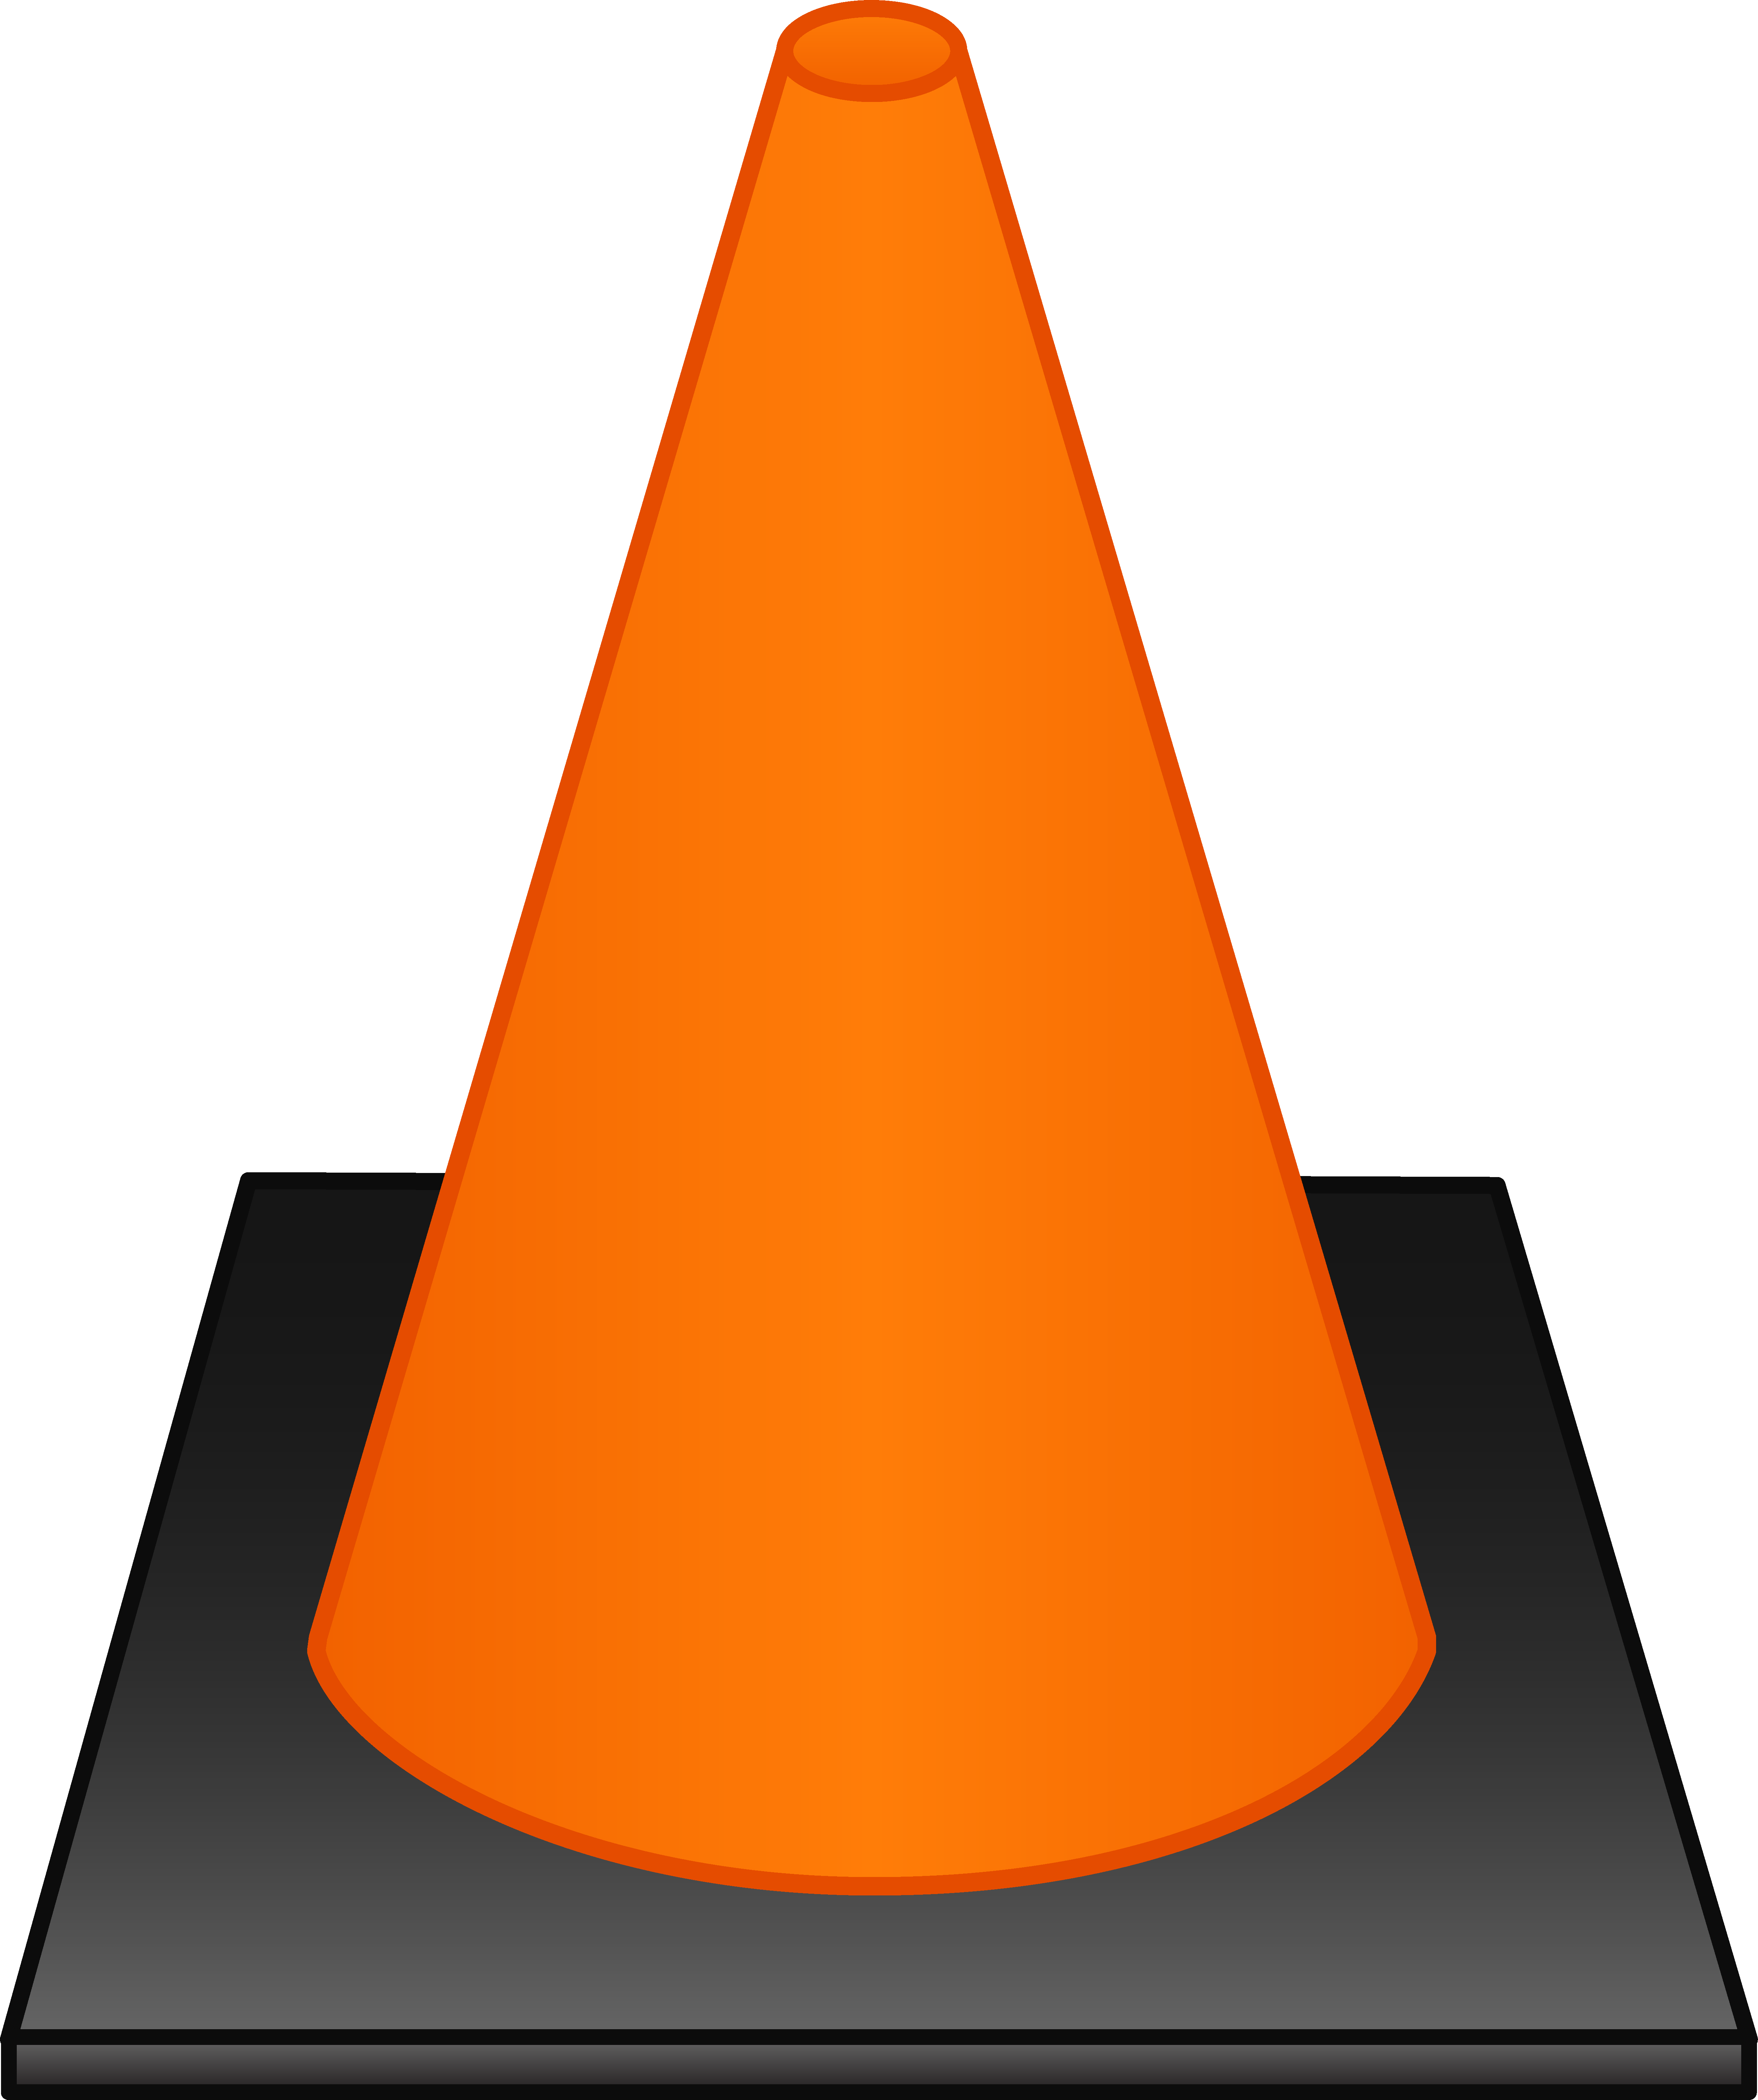 Construction Cone Images Hd Image Clipart